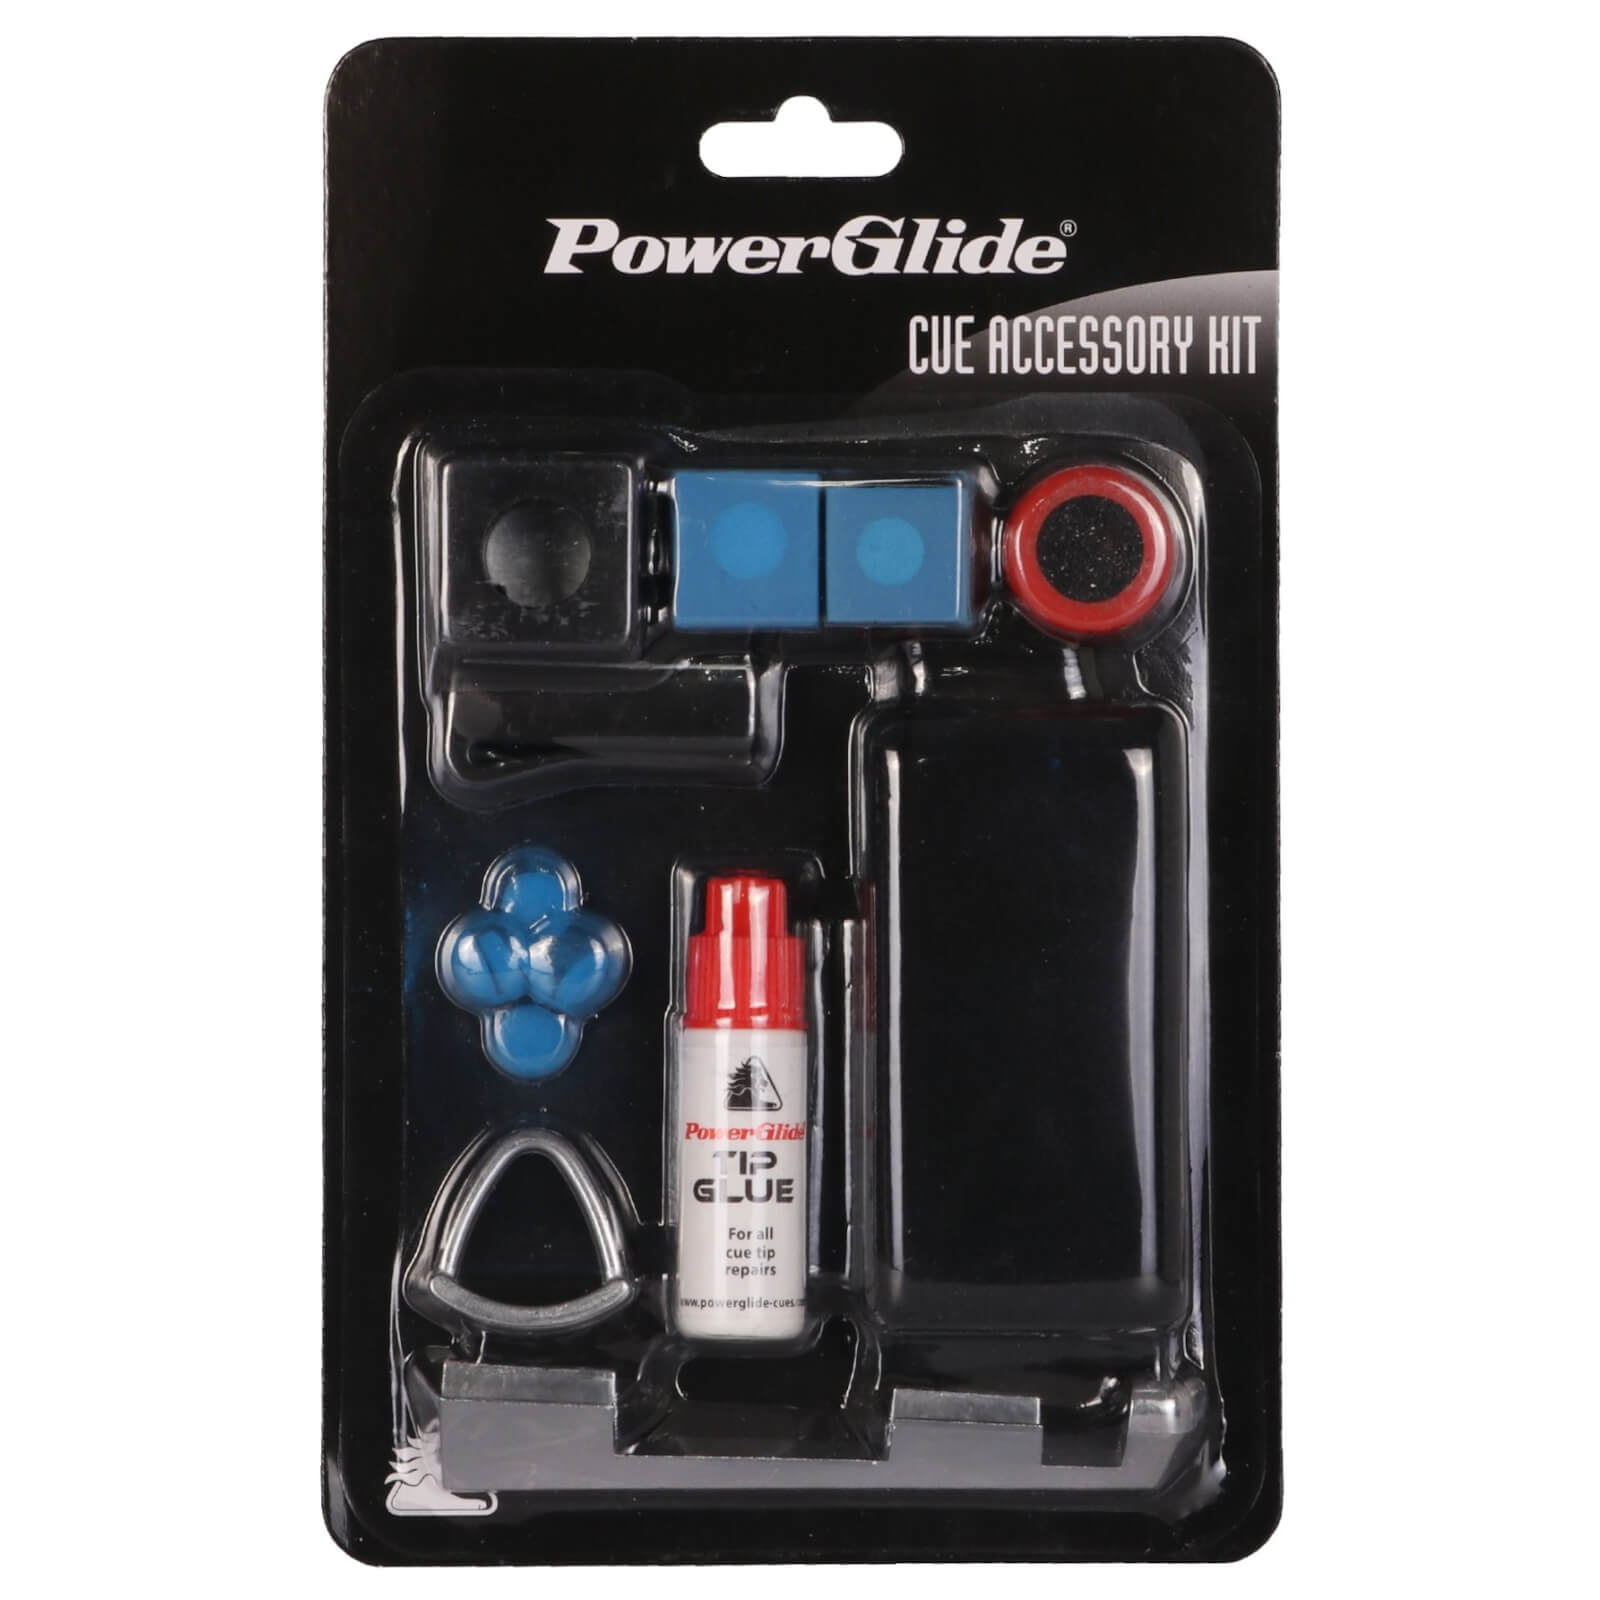 PowerGlide CUE ACCESSORY KIT Snooker Accessory